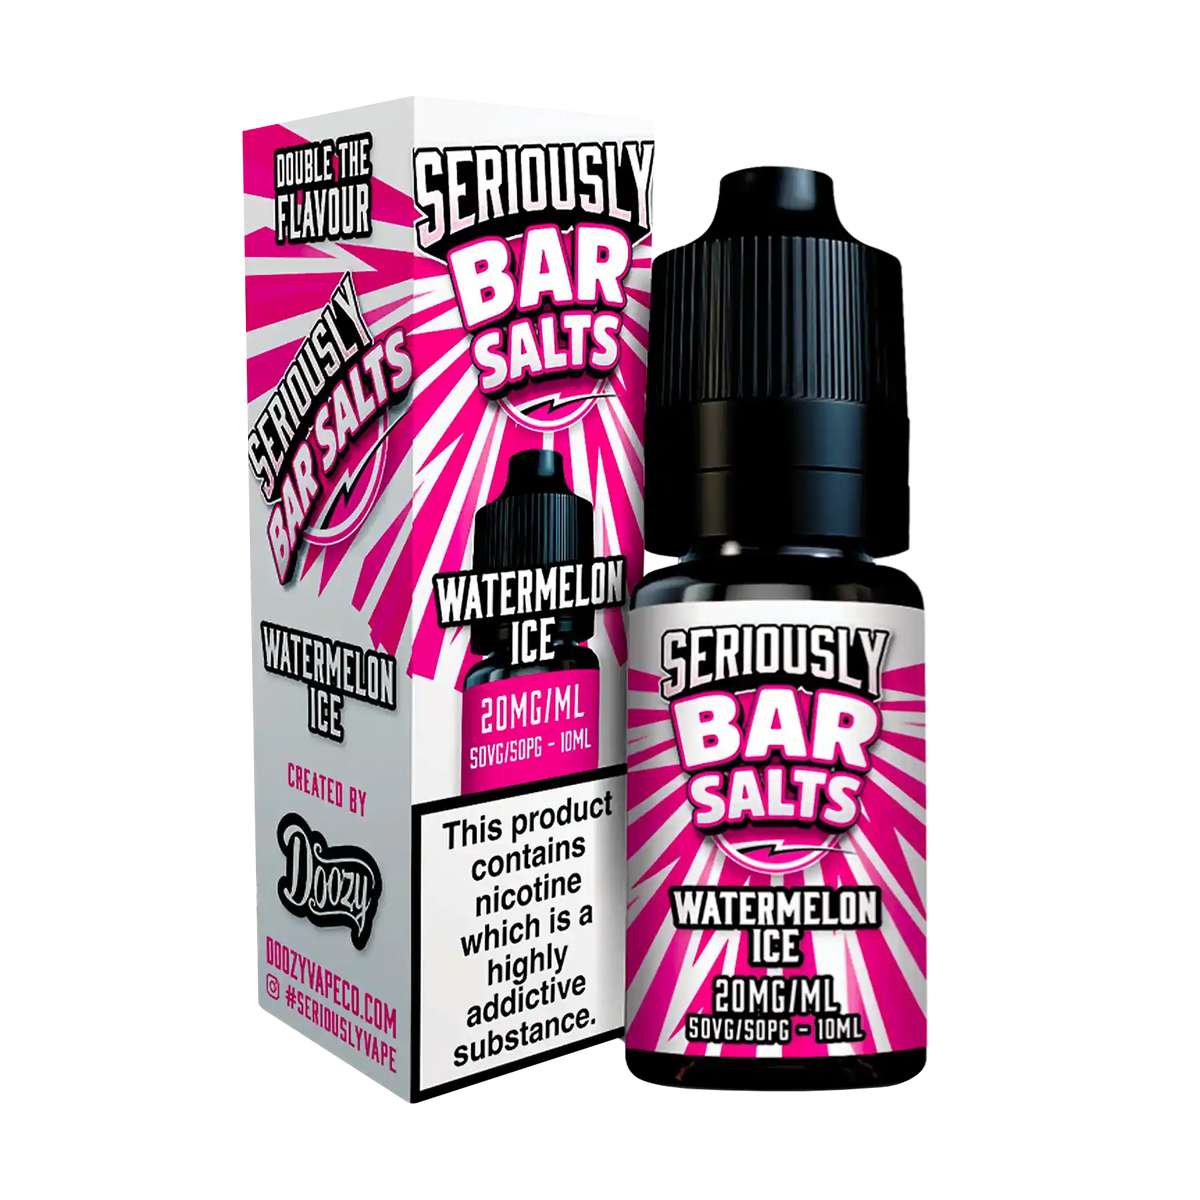 Seriously Bar Salts brings you Watermelon Ice: The Sweet Refreshing Taste of Crispy Red Watermelon with Cubes of Ice. The perfect ADV for all disposable fans.